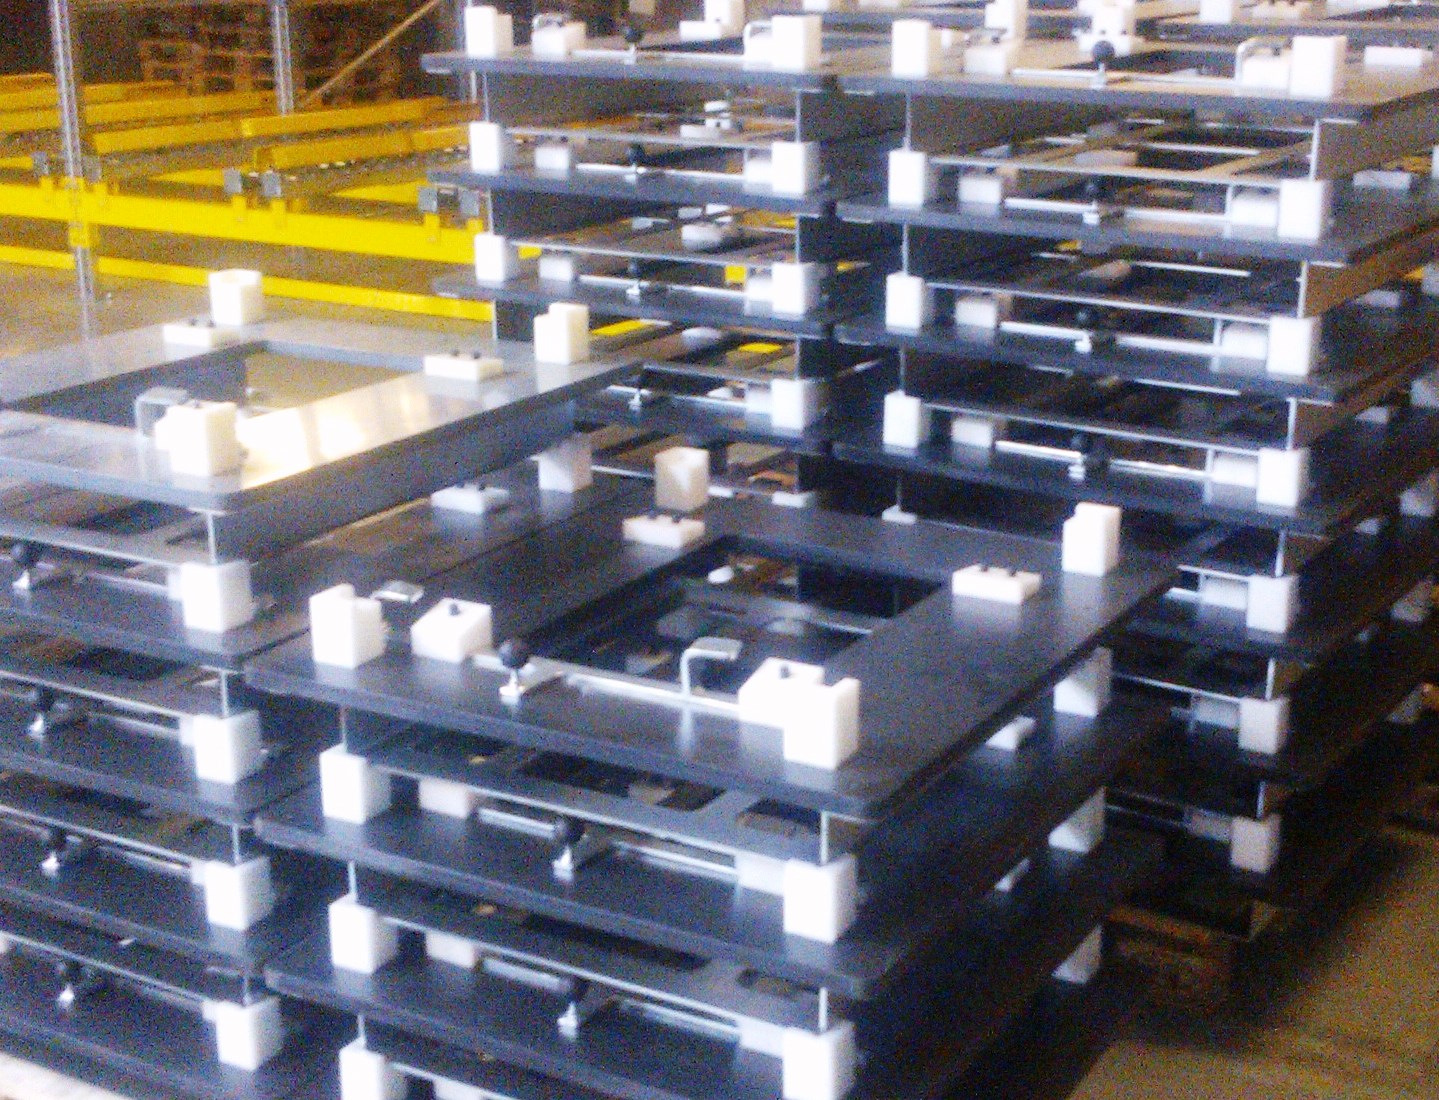 Production, shipping pallets